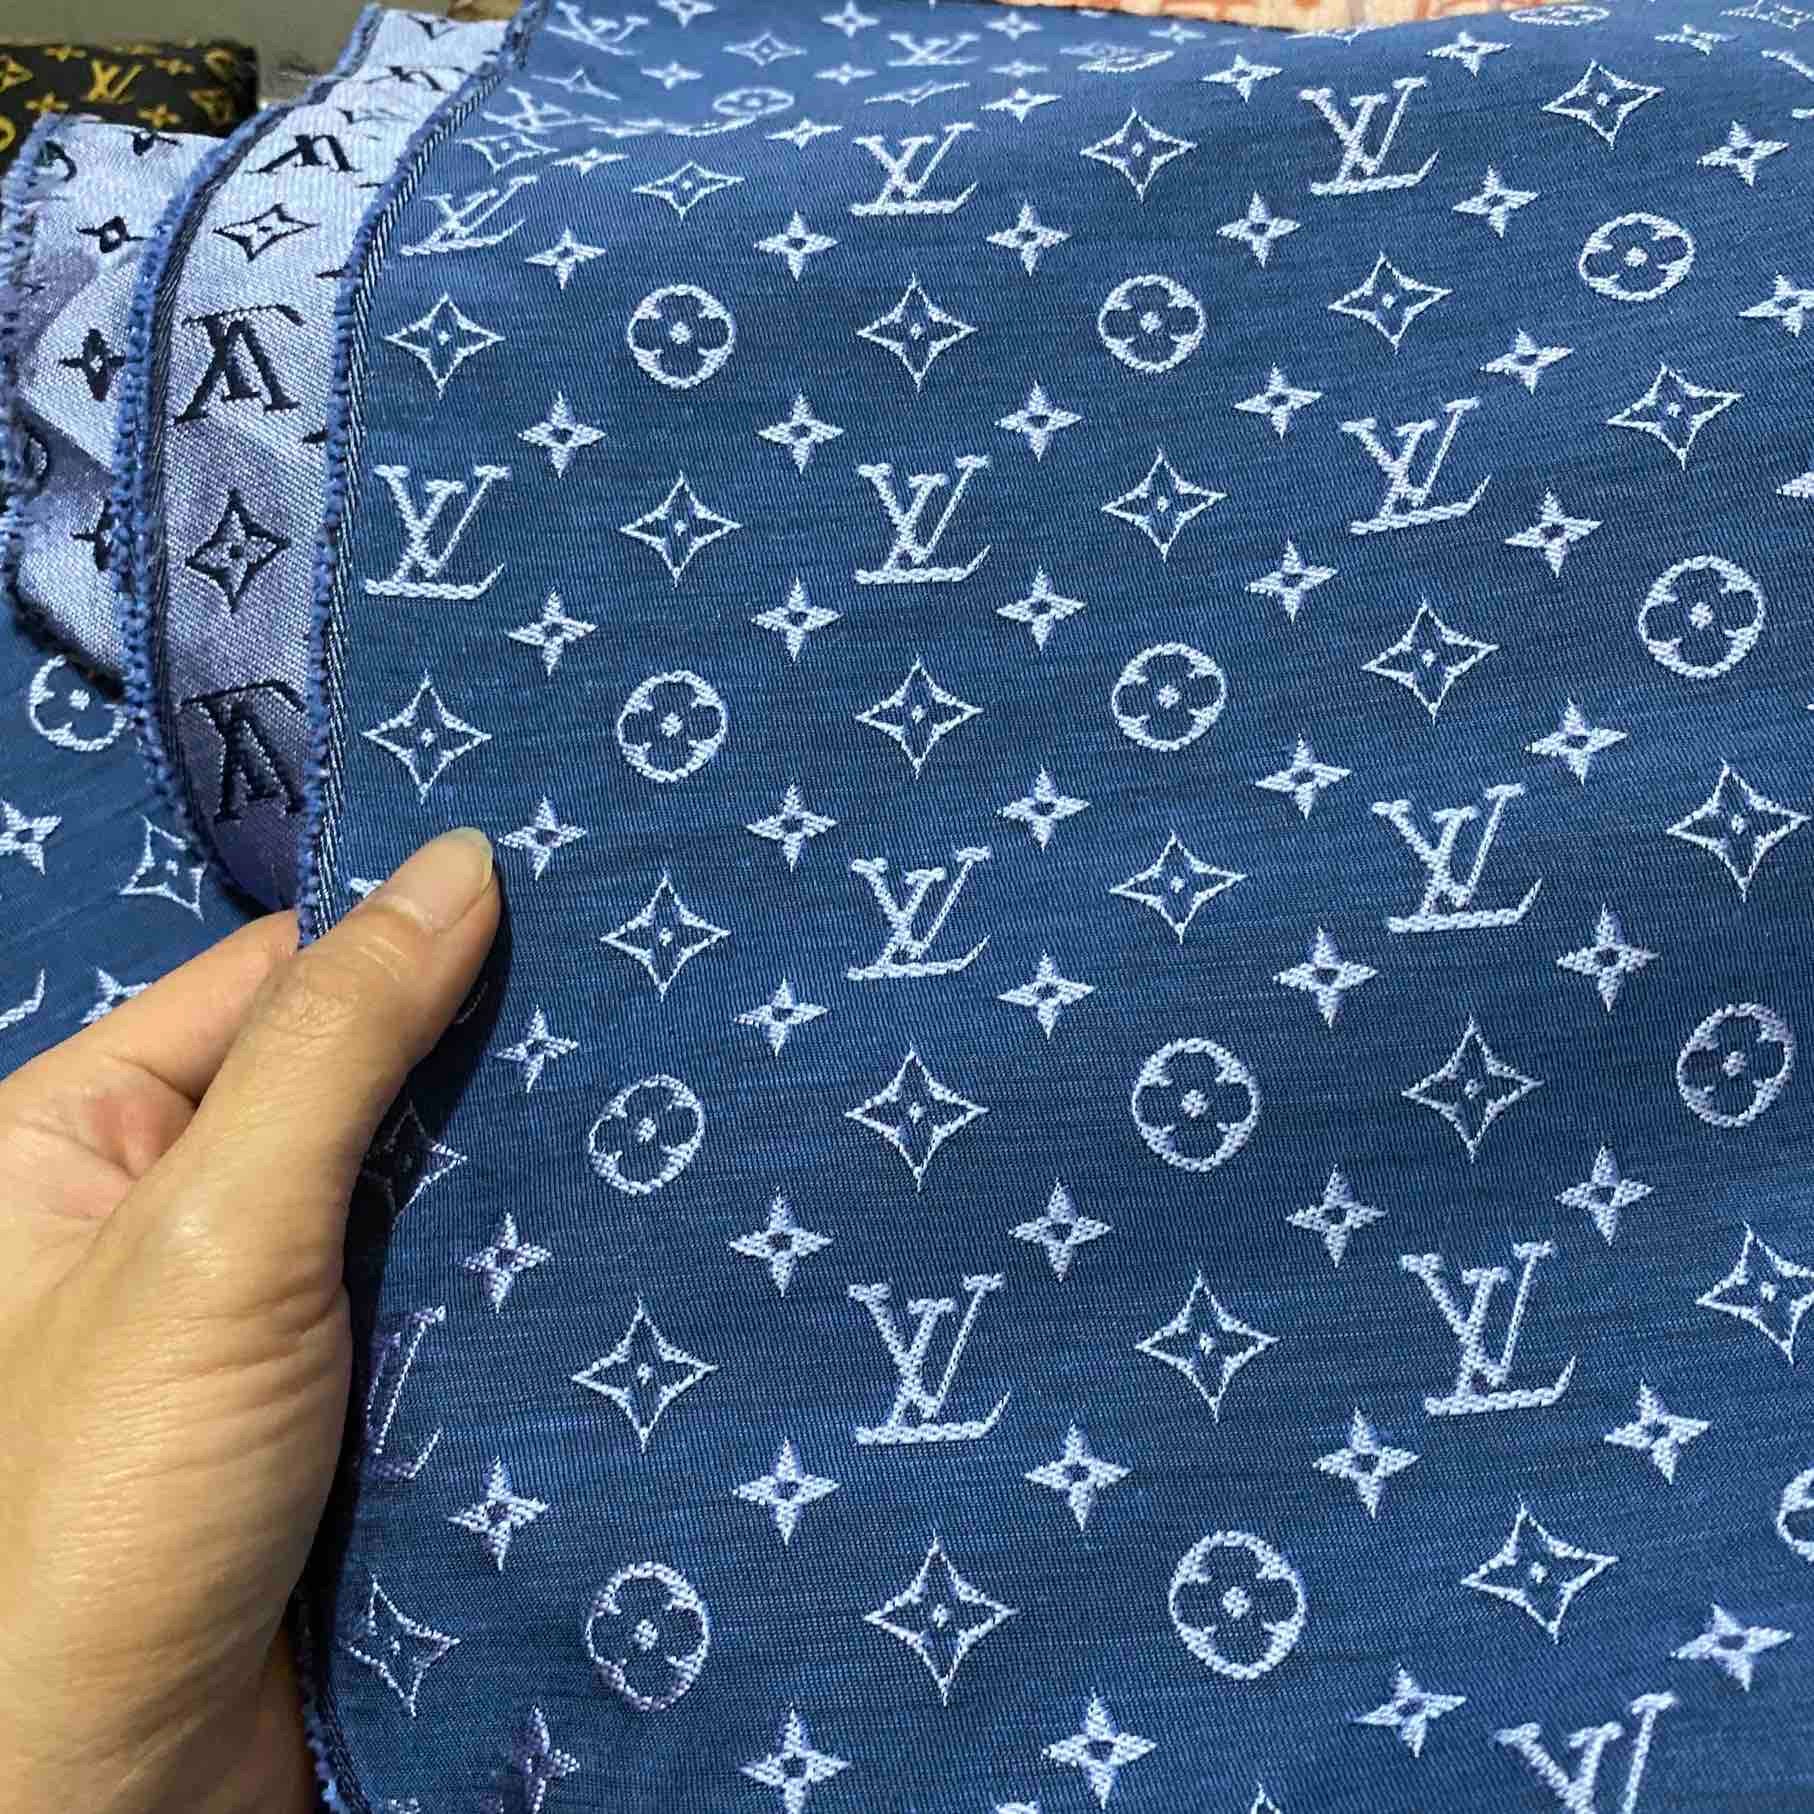 Lv Inspired Fabric By The Yard Cotton | semashow.com